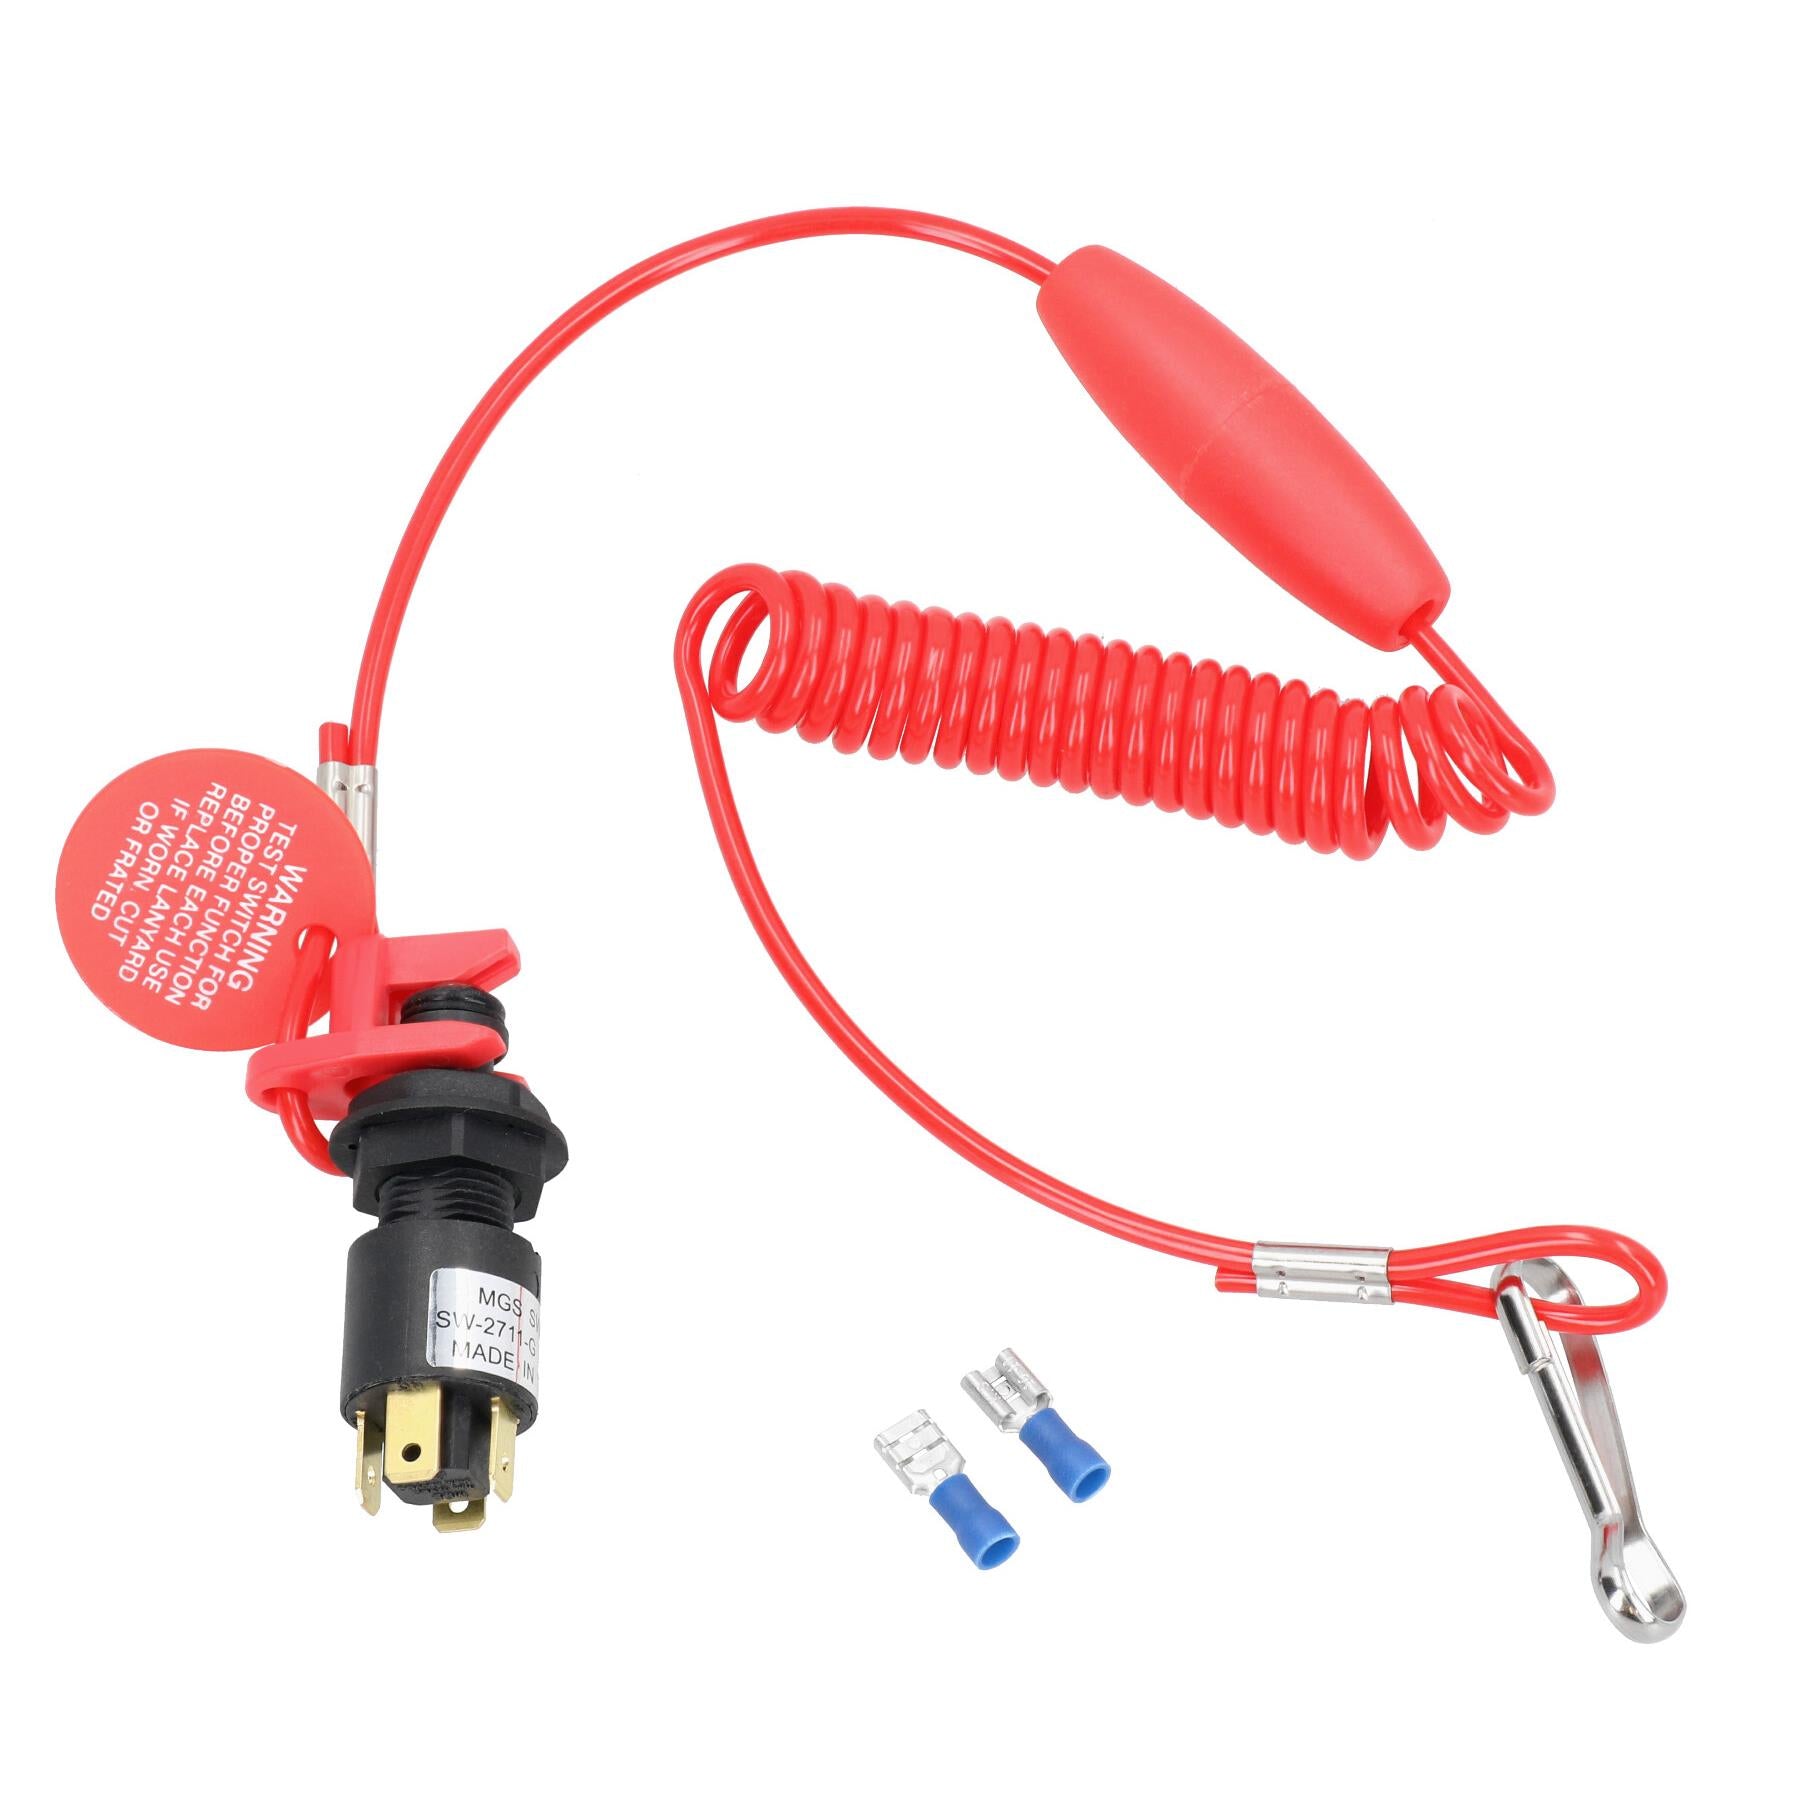 Kill Cord Engine Stop Switch Safety Lanyard Make or Break Type Boat Outboard